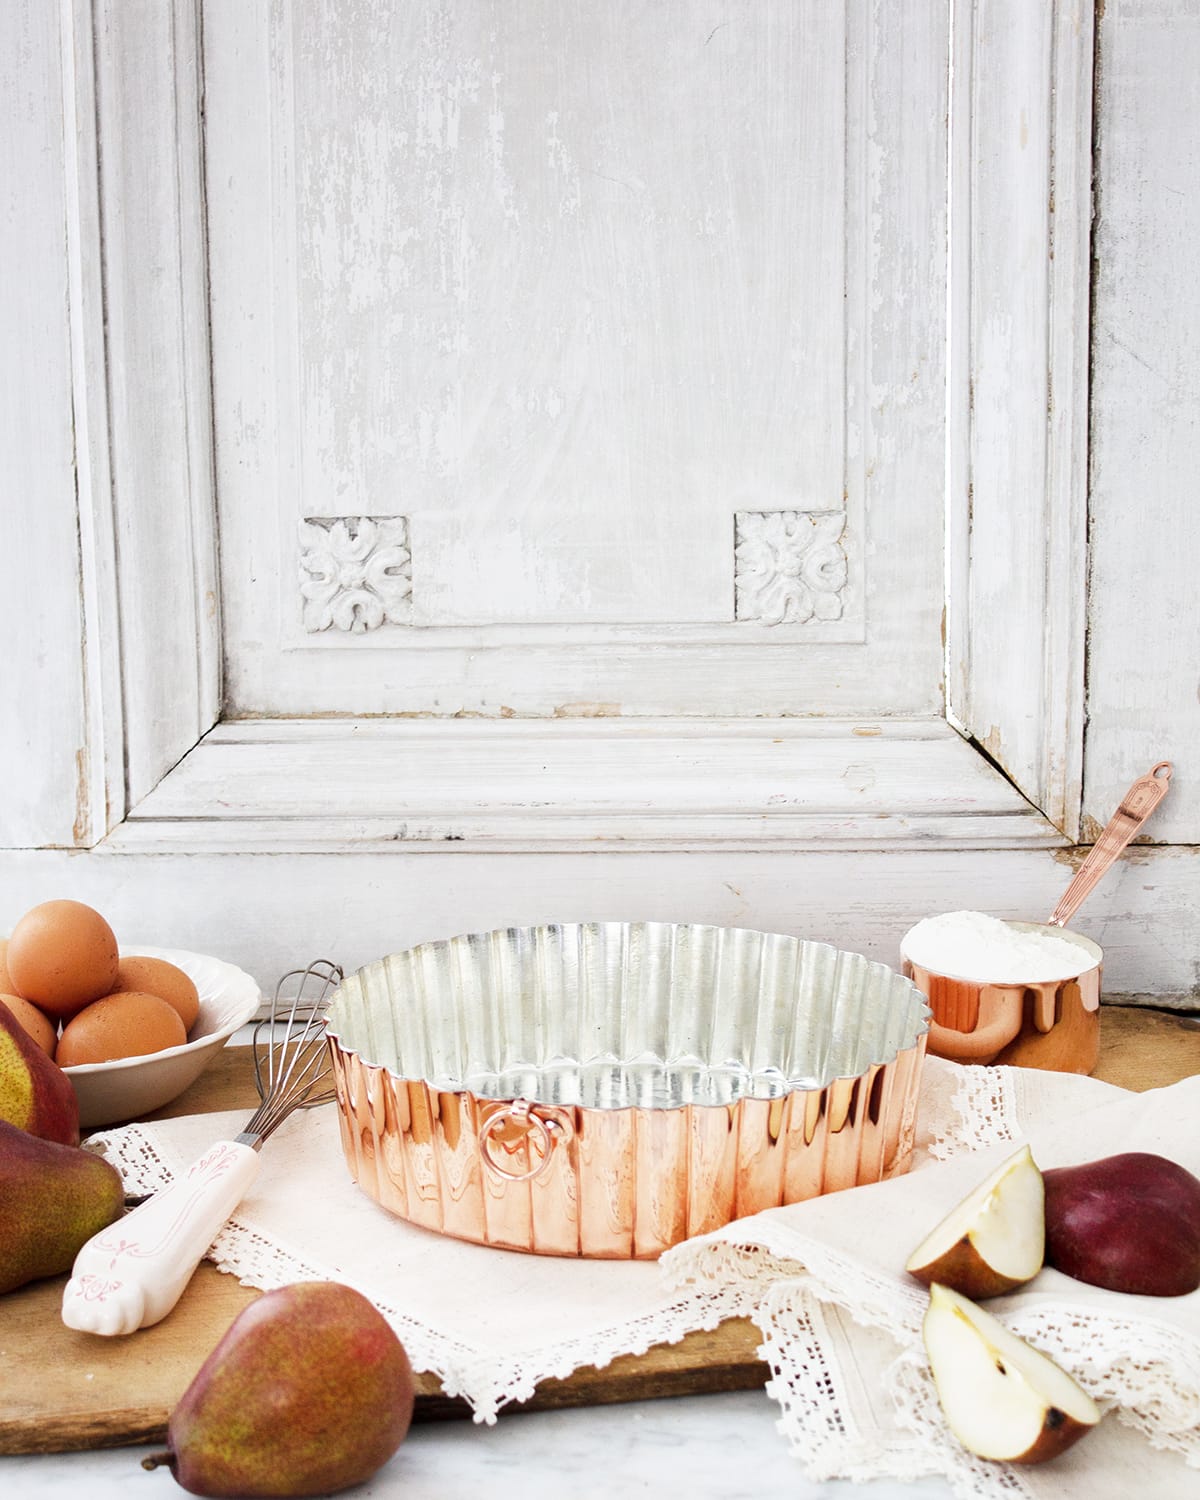 Shop Coppermill Kitchen Vintage-inspired Copper Fluted Cake Pan